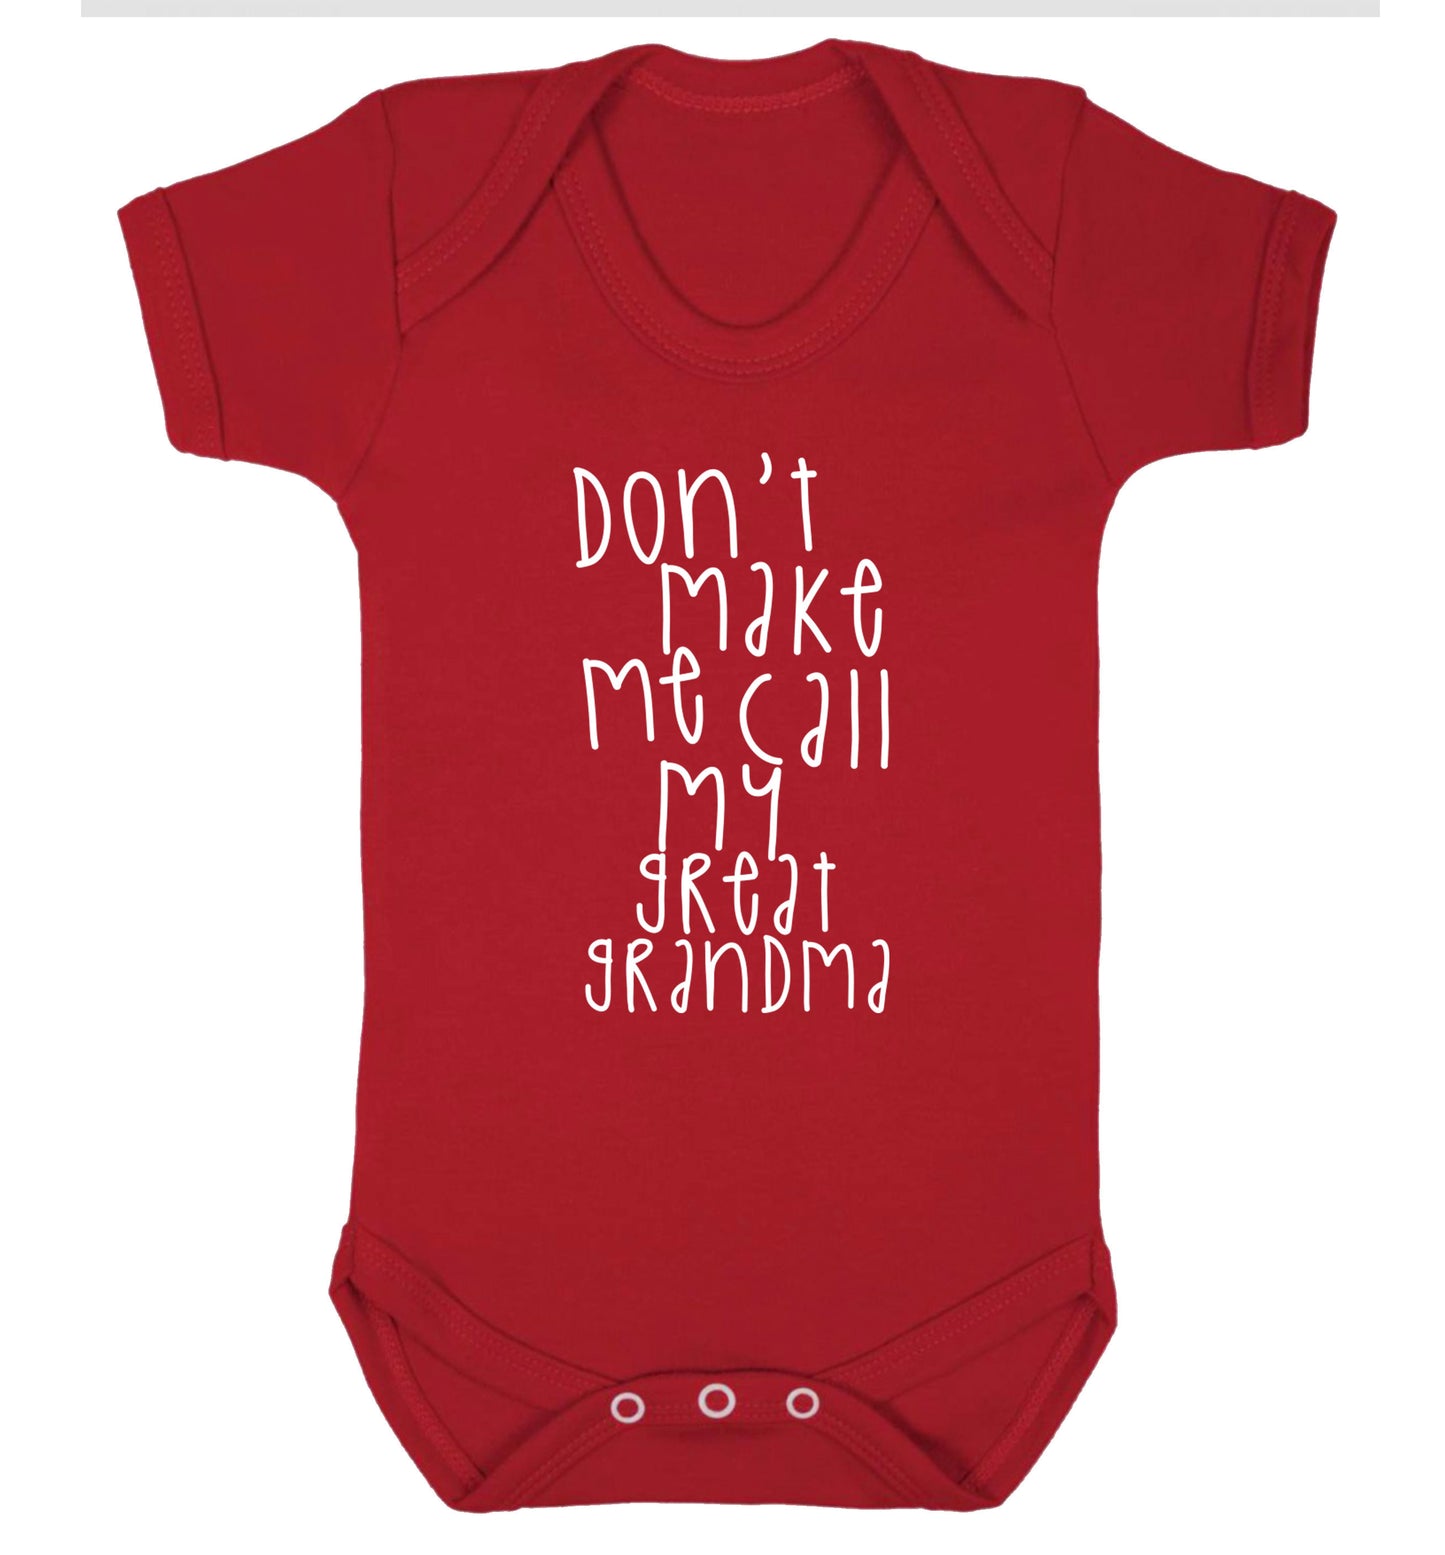 Don't make me call my great grandma Baby Vest red 18-24 months